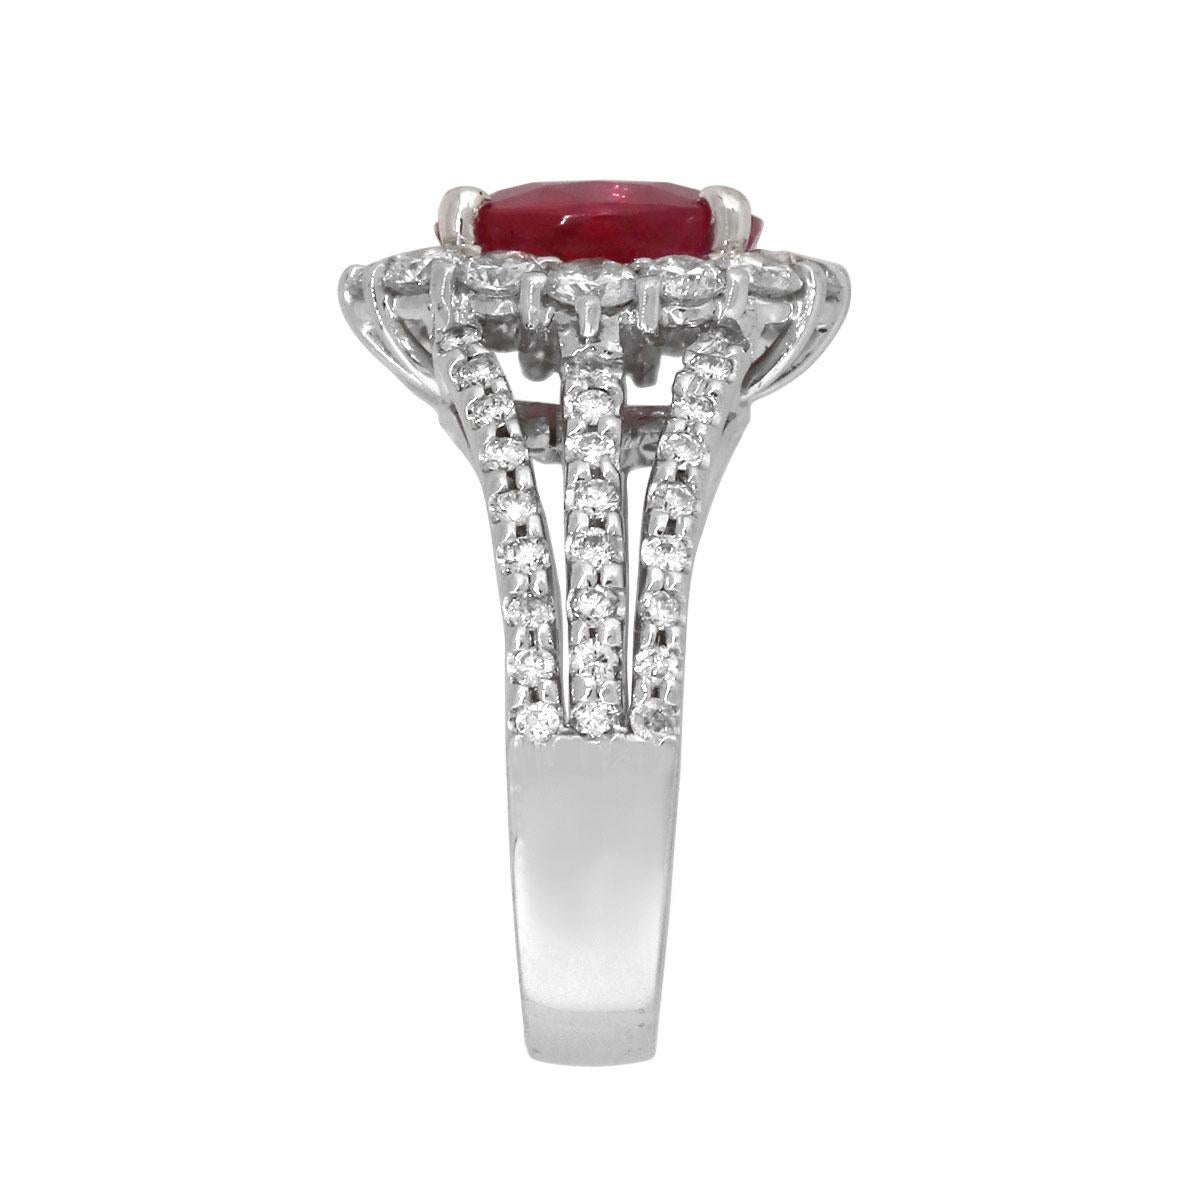 Material: 18k White Gold
Gemstone Details: Approx. 3.02ctw oval ruby measuring approx. 7.8mm x 9.70mm. AGL: CS1074580
Diamond Details: Approx. 1.31ctw round cut diamonds. Diamonds are G/H in color and VS in clarity.
Ring Size: 6
Measurements: 0.80